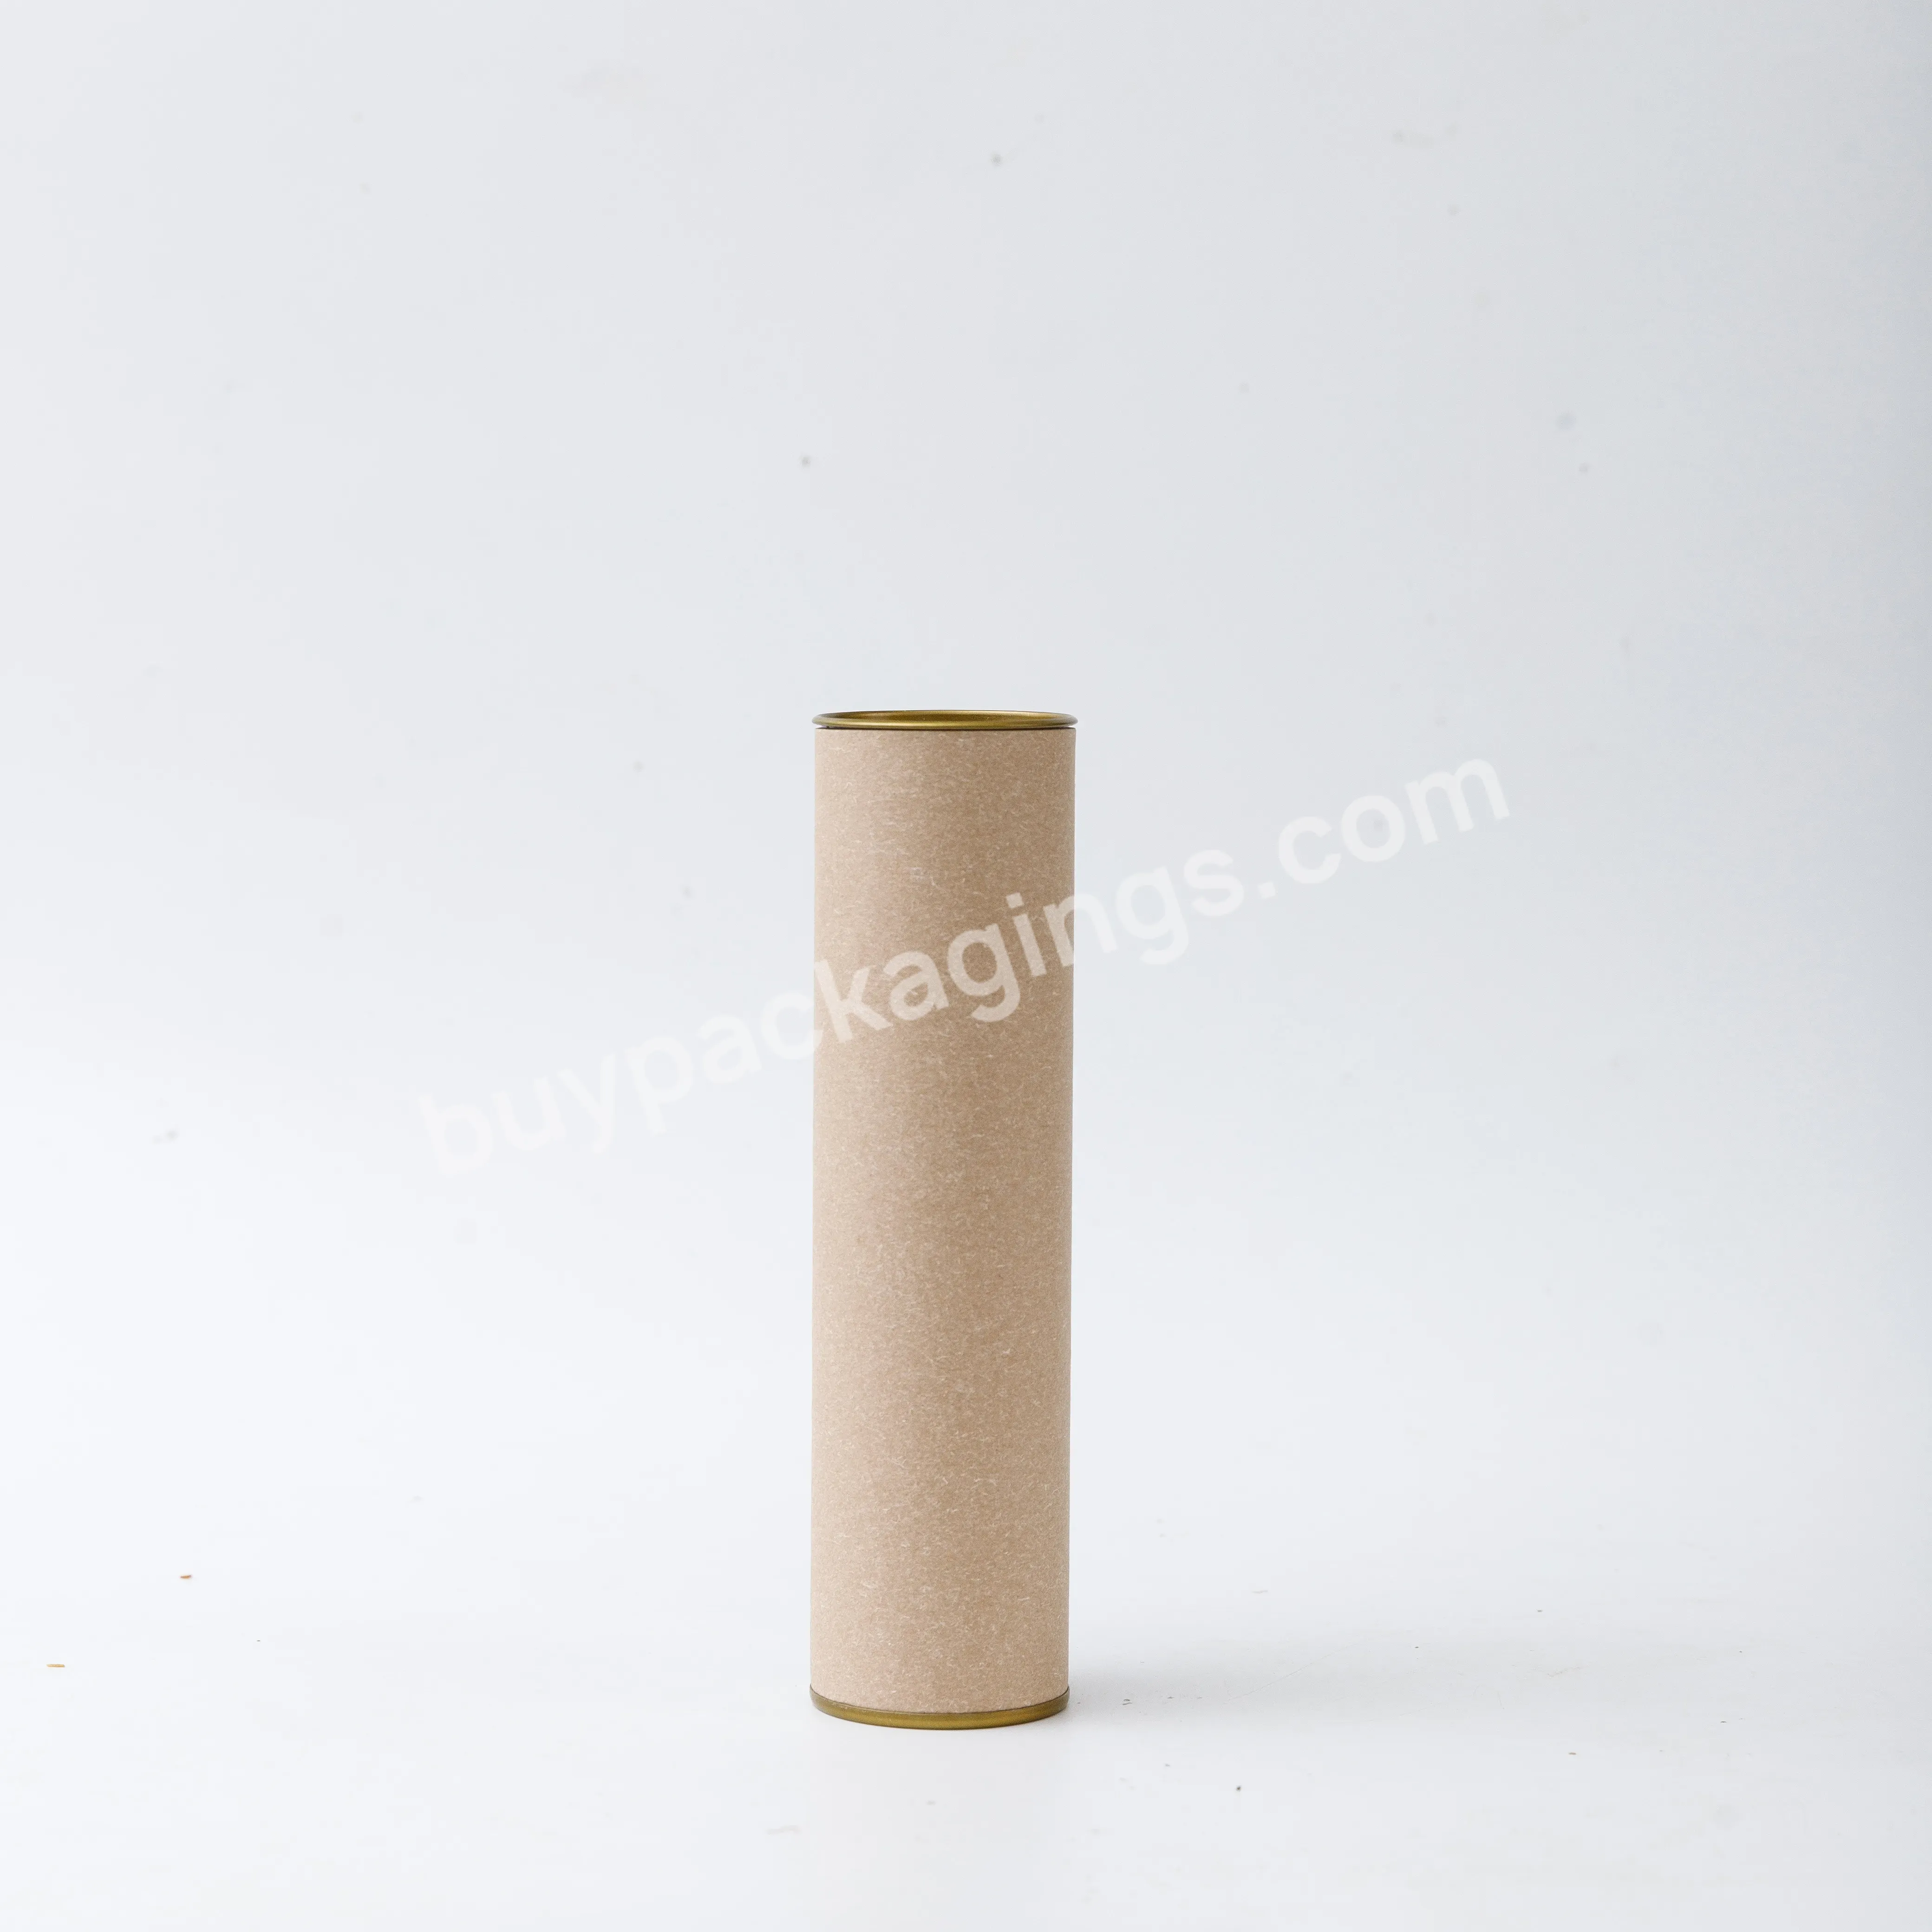 Tianyi Packing Souvenir Cardboard Composite Customize Printed Craft Cylinder Round Tea Packaging And Tin Lids Paper Cans